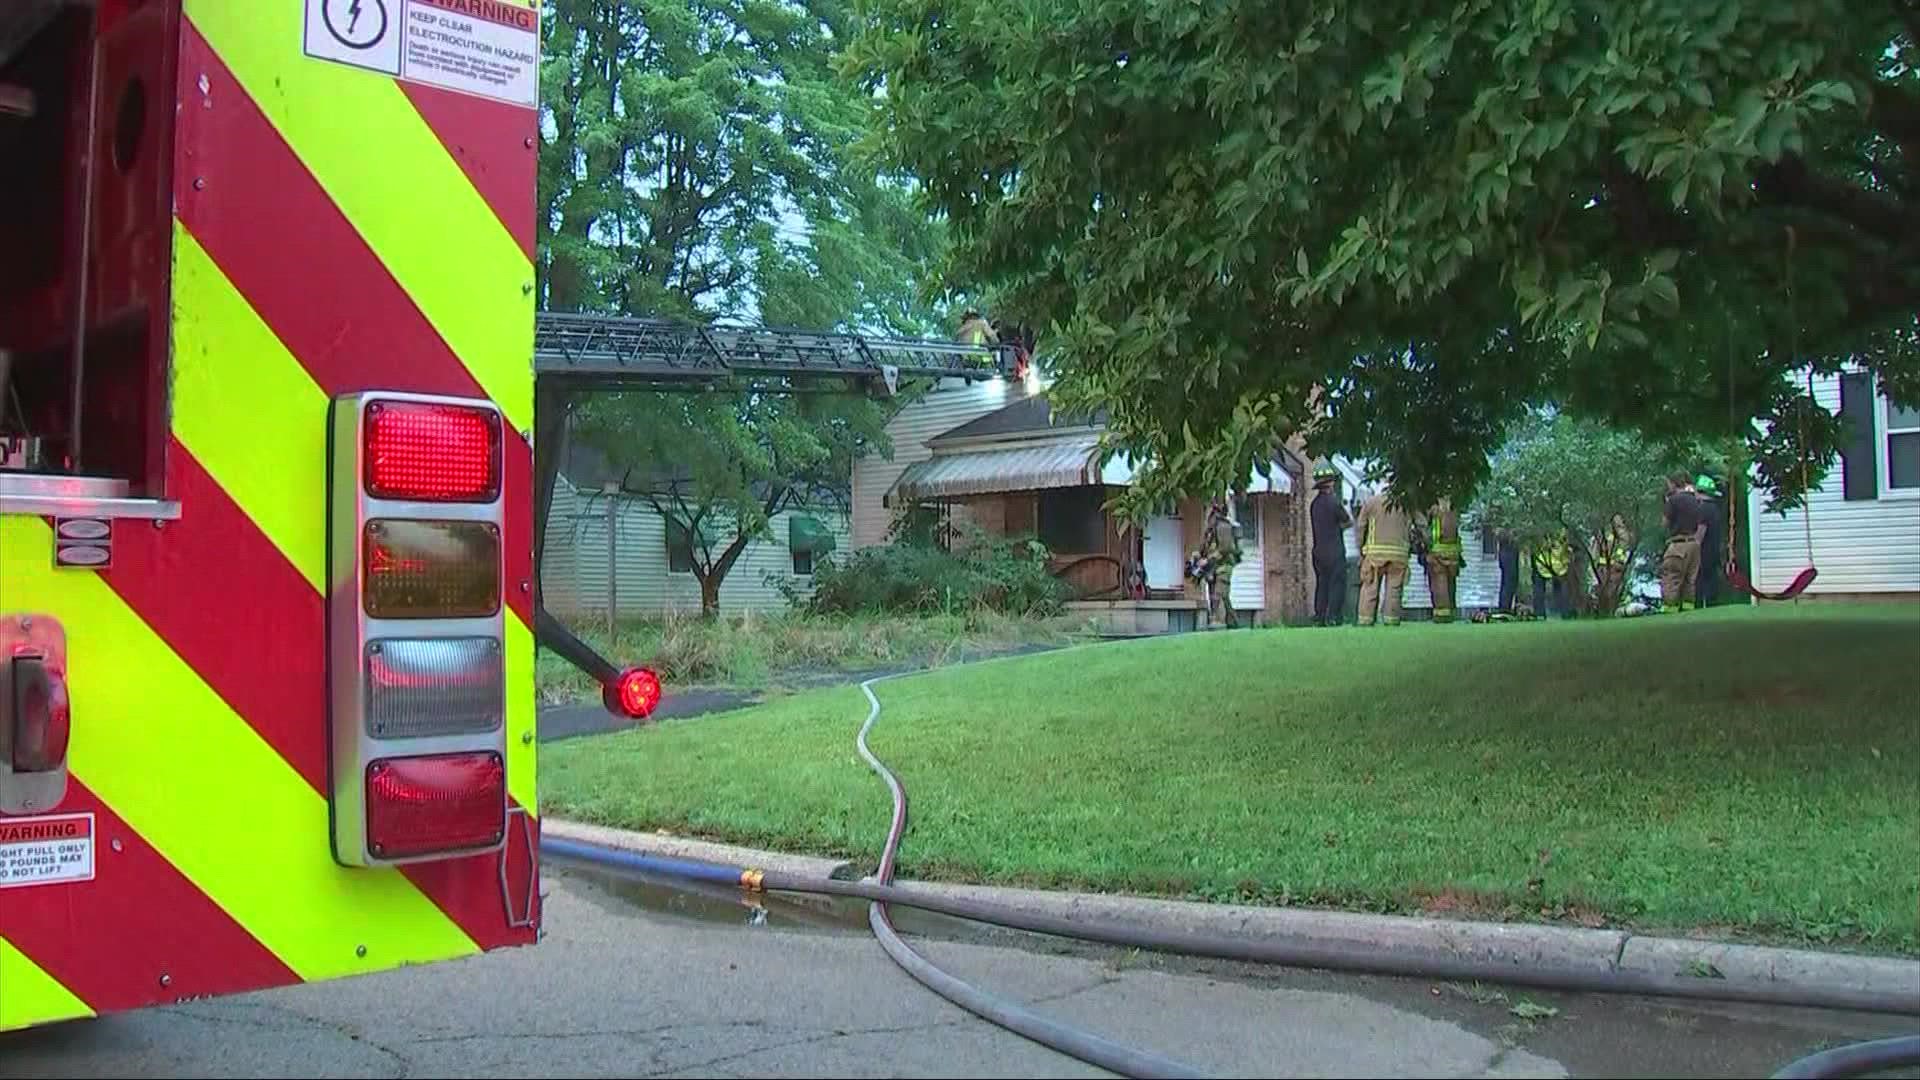 The fire happened on the 1600 block of Linwood Avenue just west of Lockbourne Road around 6:10 a.m.